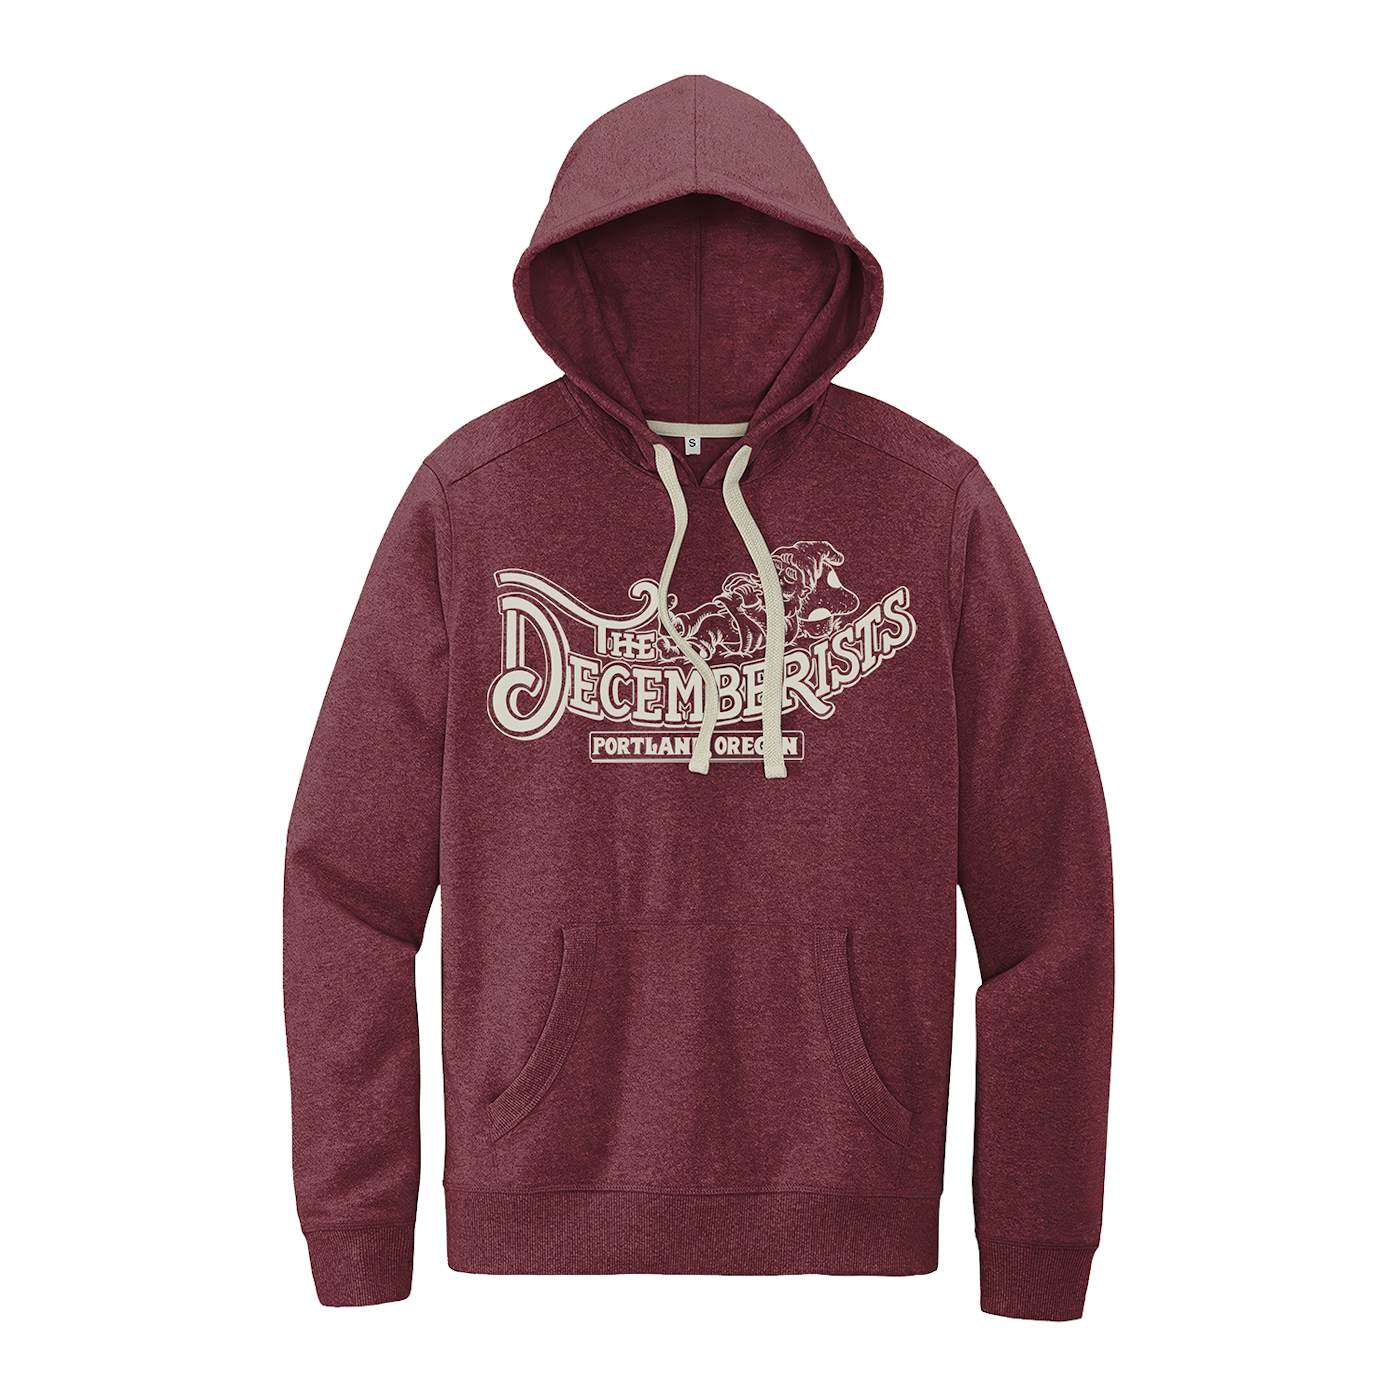 The Decemberists Gnome Hoodie